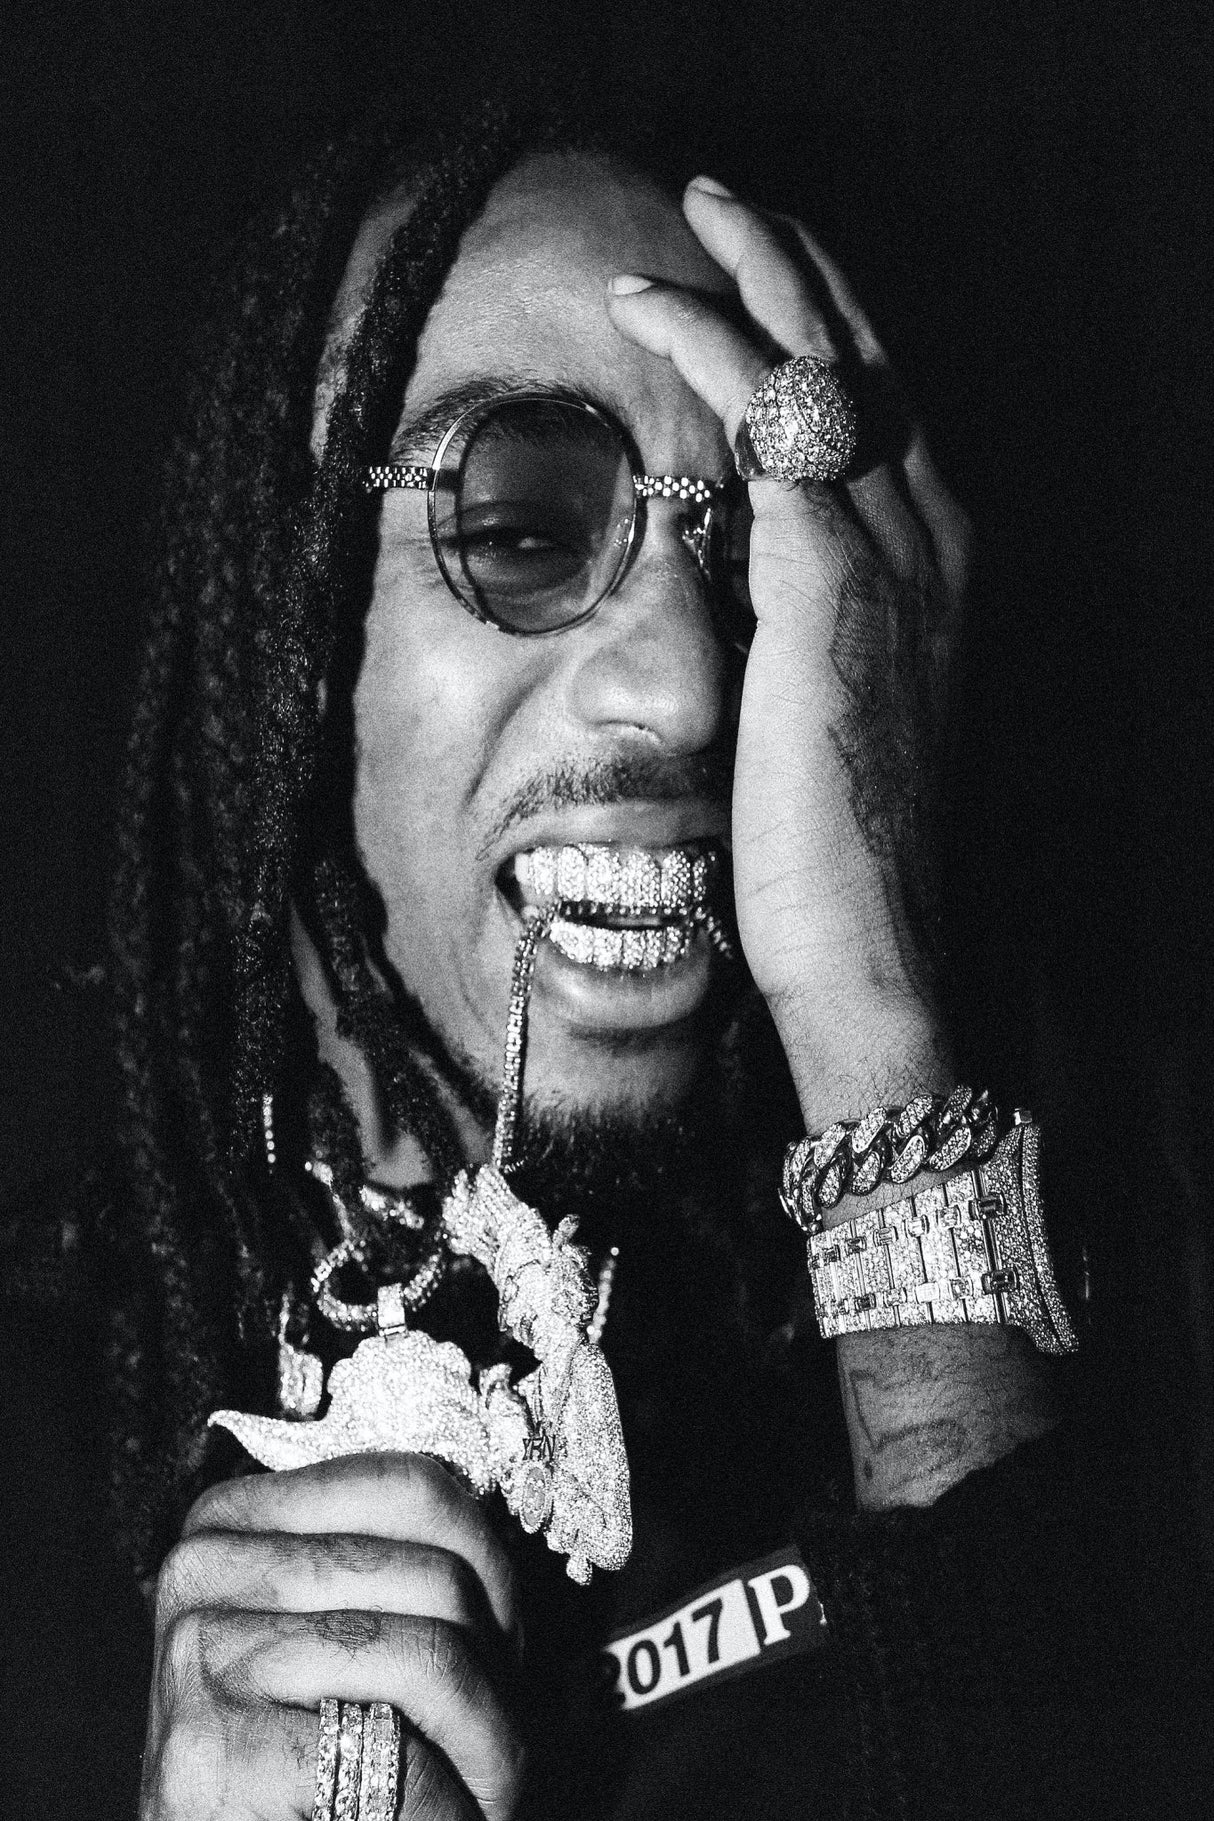 Quavo Huncho B&W 'Iced' Poster - Postertok Posters